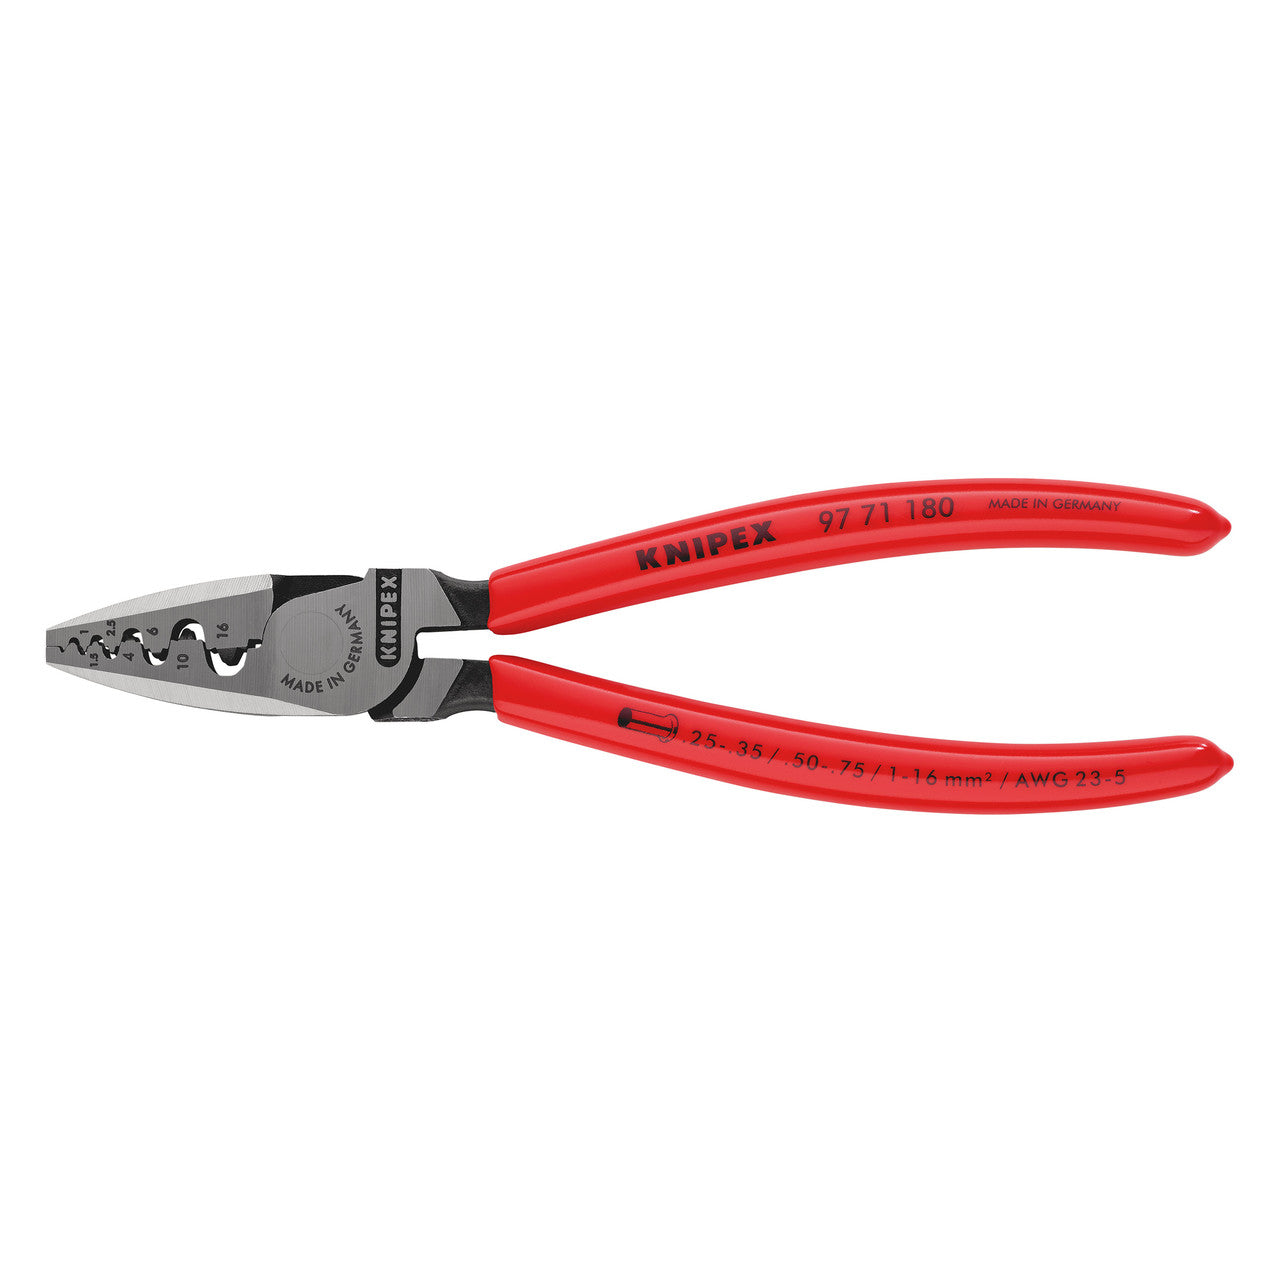 Knipex 9771180 Crimping Pliers for Wire Ferrules 180mm